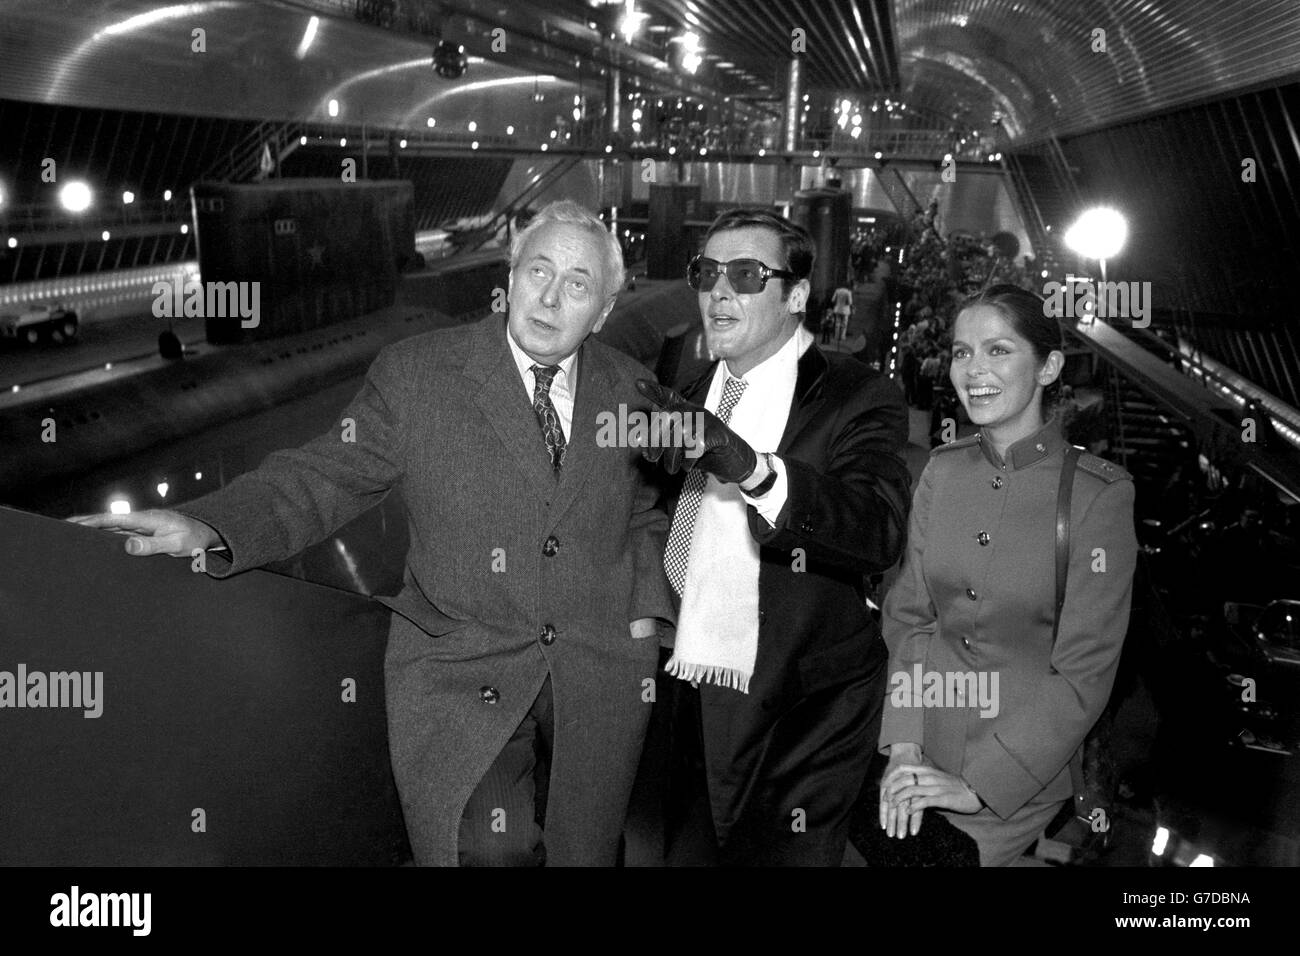 Sir Harold Wilson attends the opening of the 'largest film stage in the world' at Pinewood Studios. He is shown round by actor Roger Moore and his co-star Barbara Bach, who appear together in The Spy Who Loved Me. The film stage was created for the James Bond film and will be used for major scenes featuring a super tanker and submarines. Stock Photo